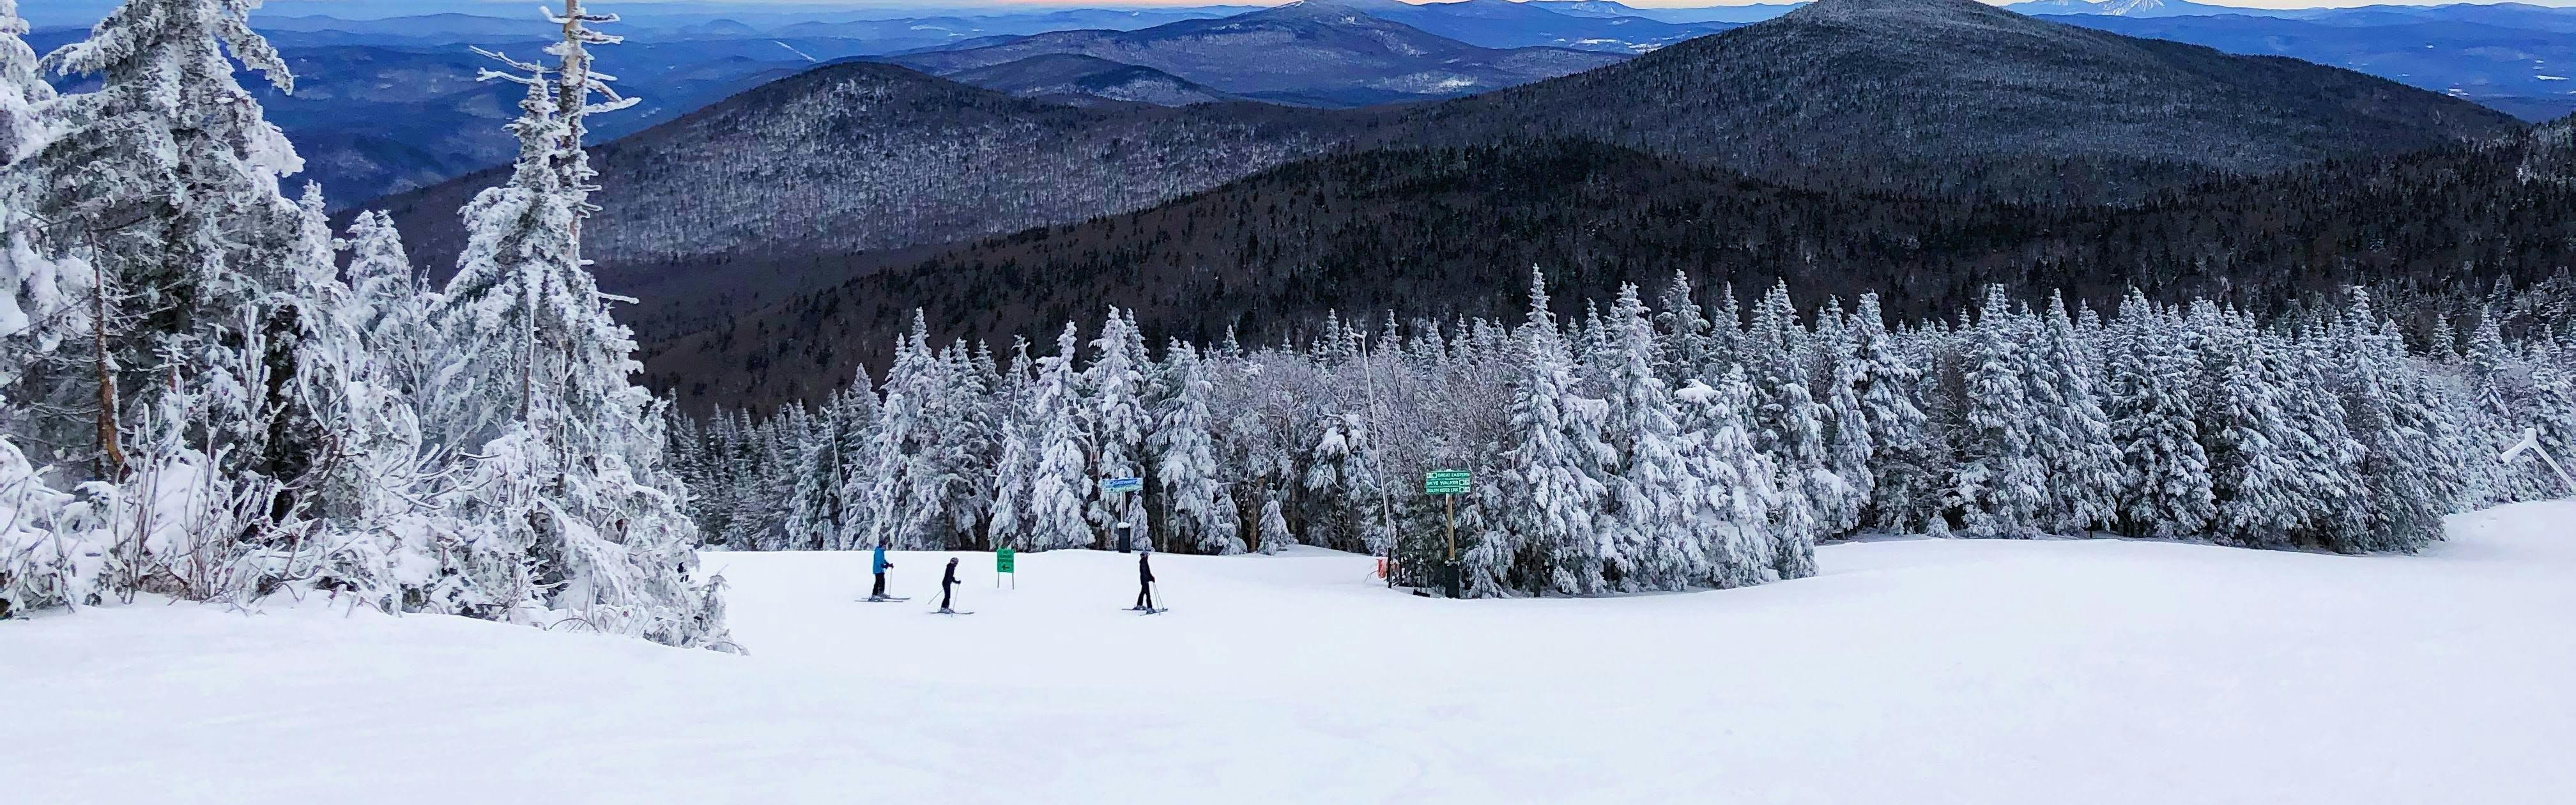 Several skiers standing on the run at a ski resort in Vermont. 